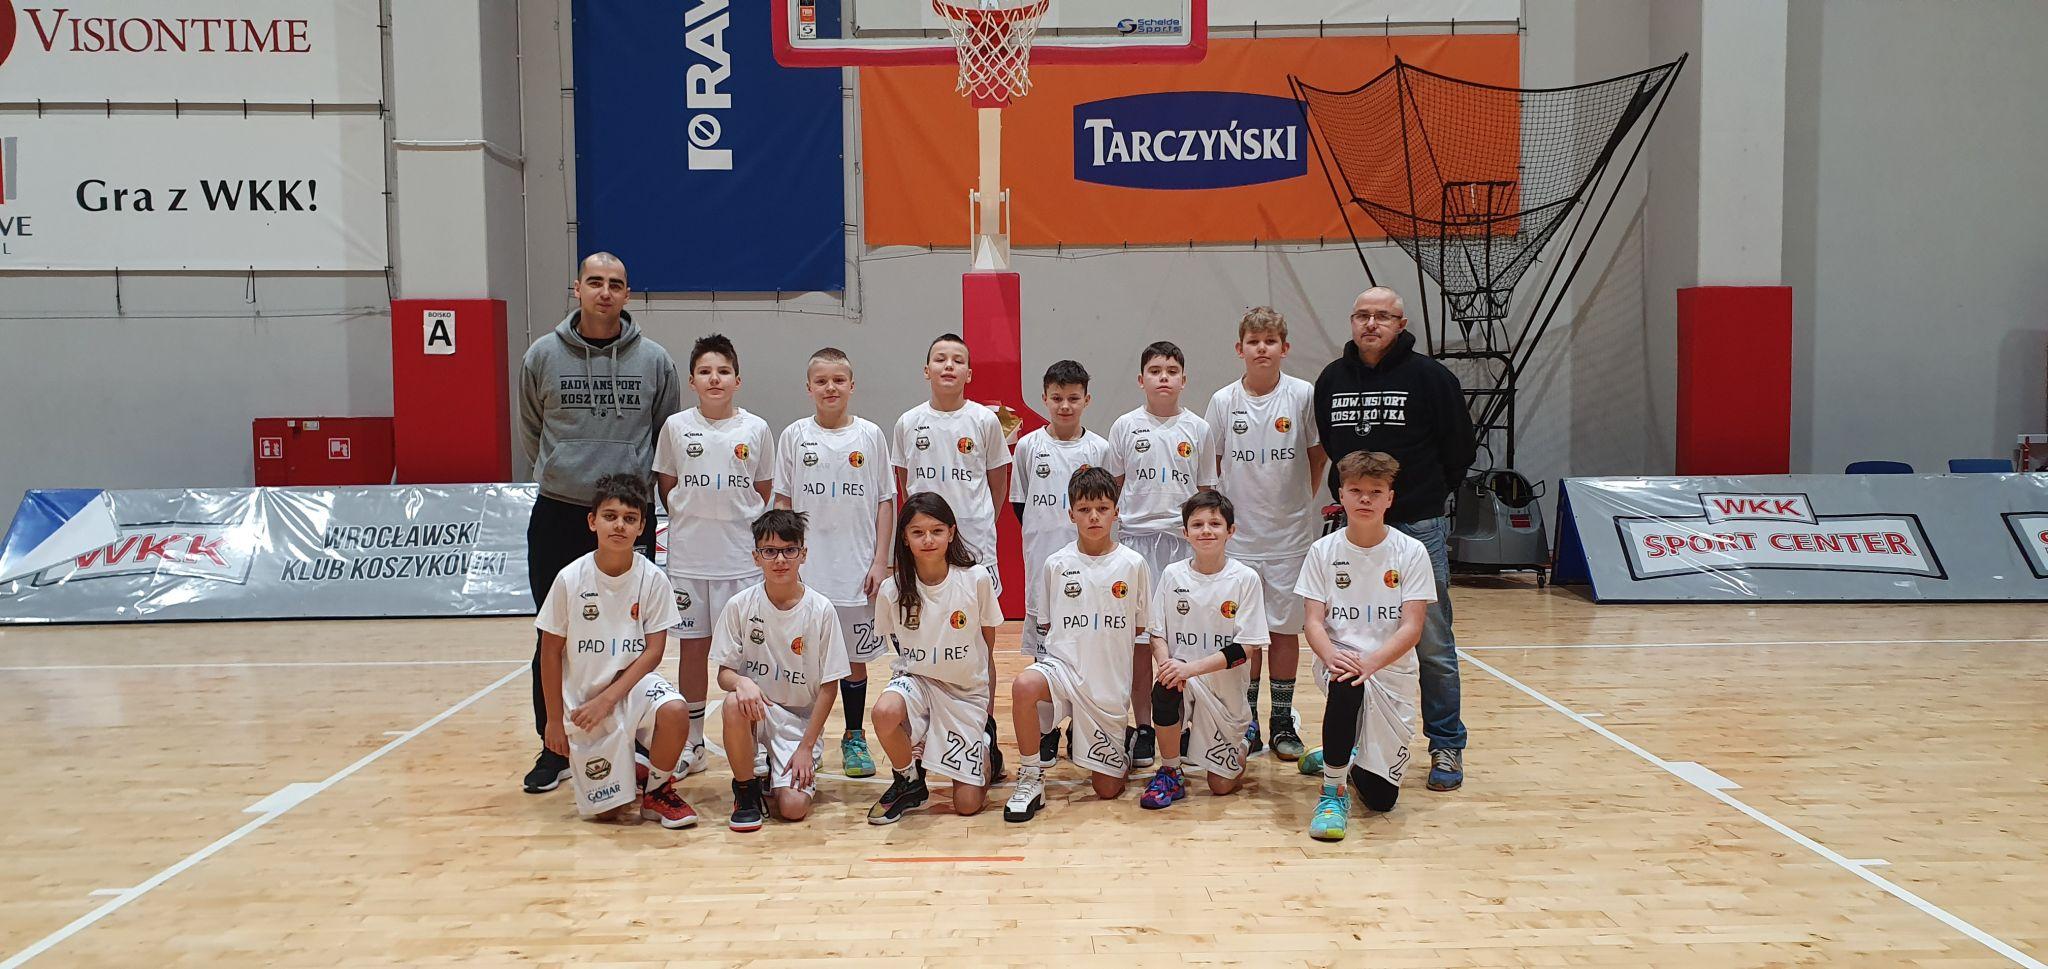 PAD RES as Official Sponsor of the Young Basketball Team!-article-main-image